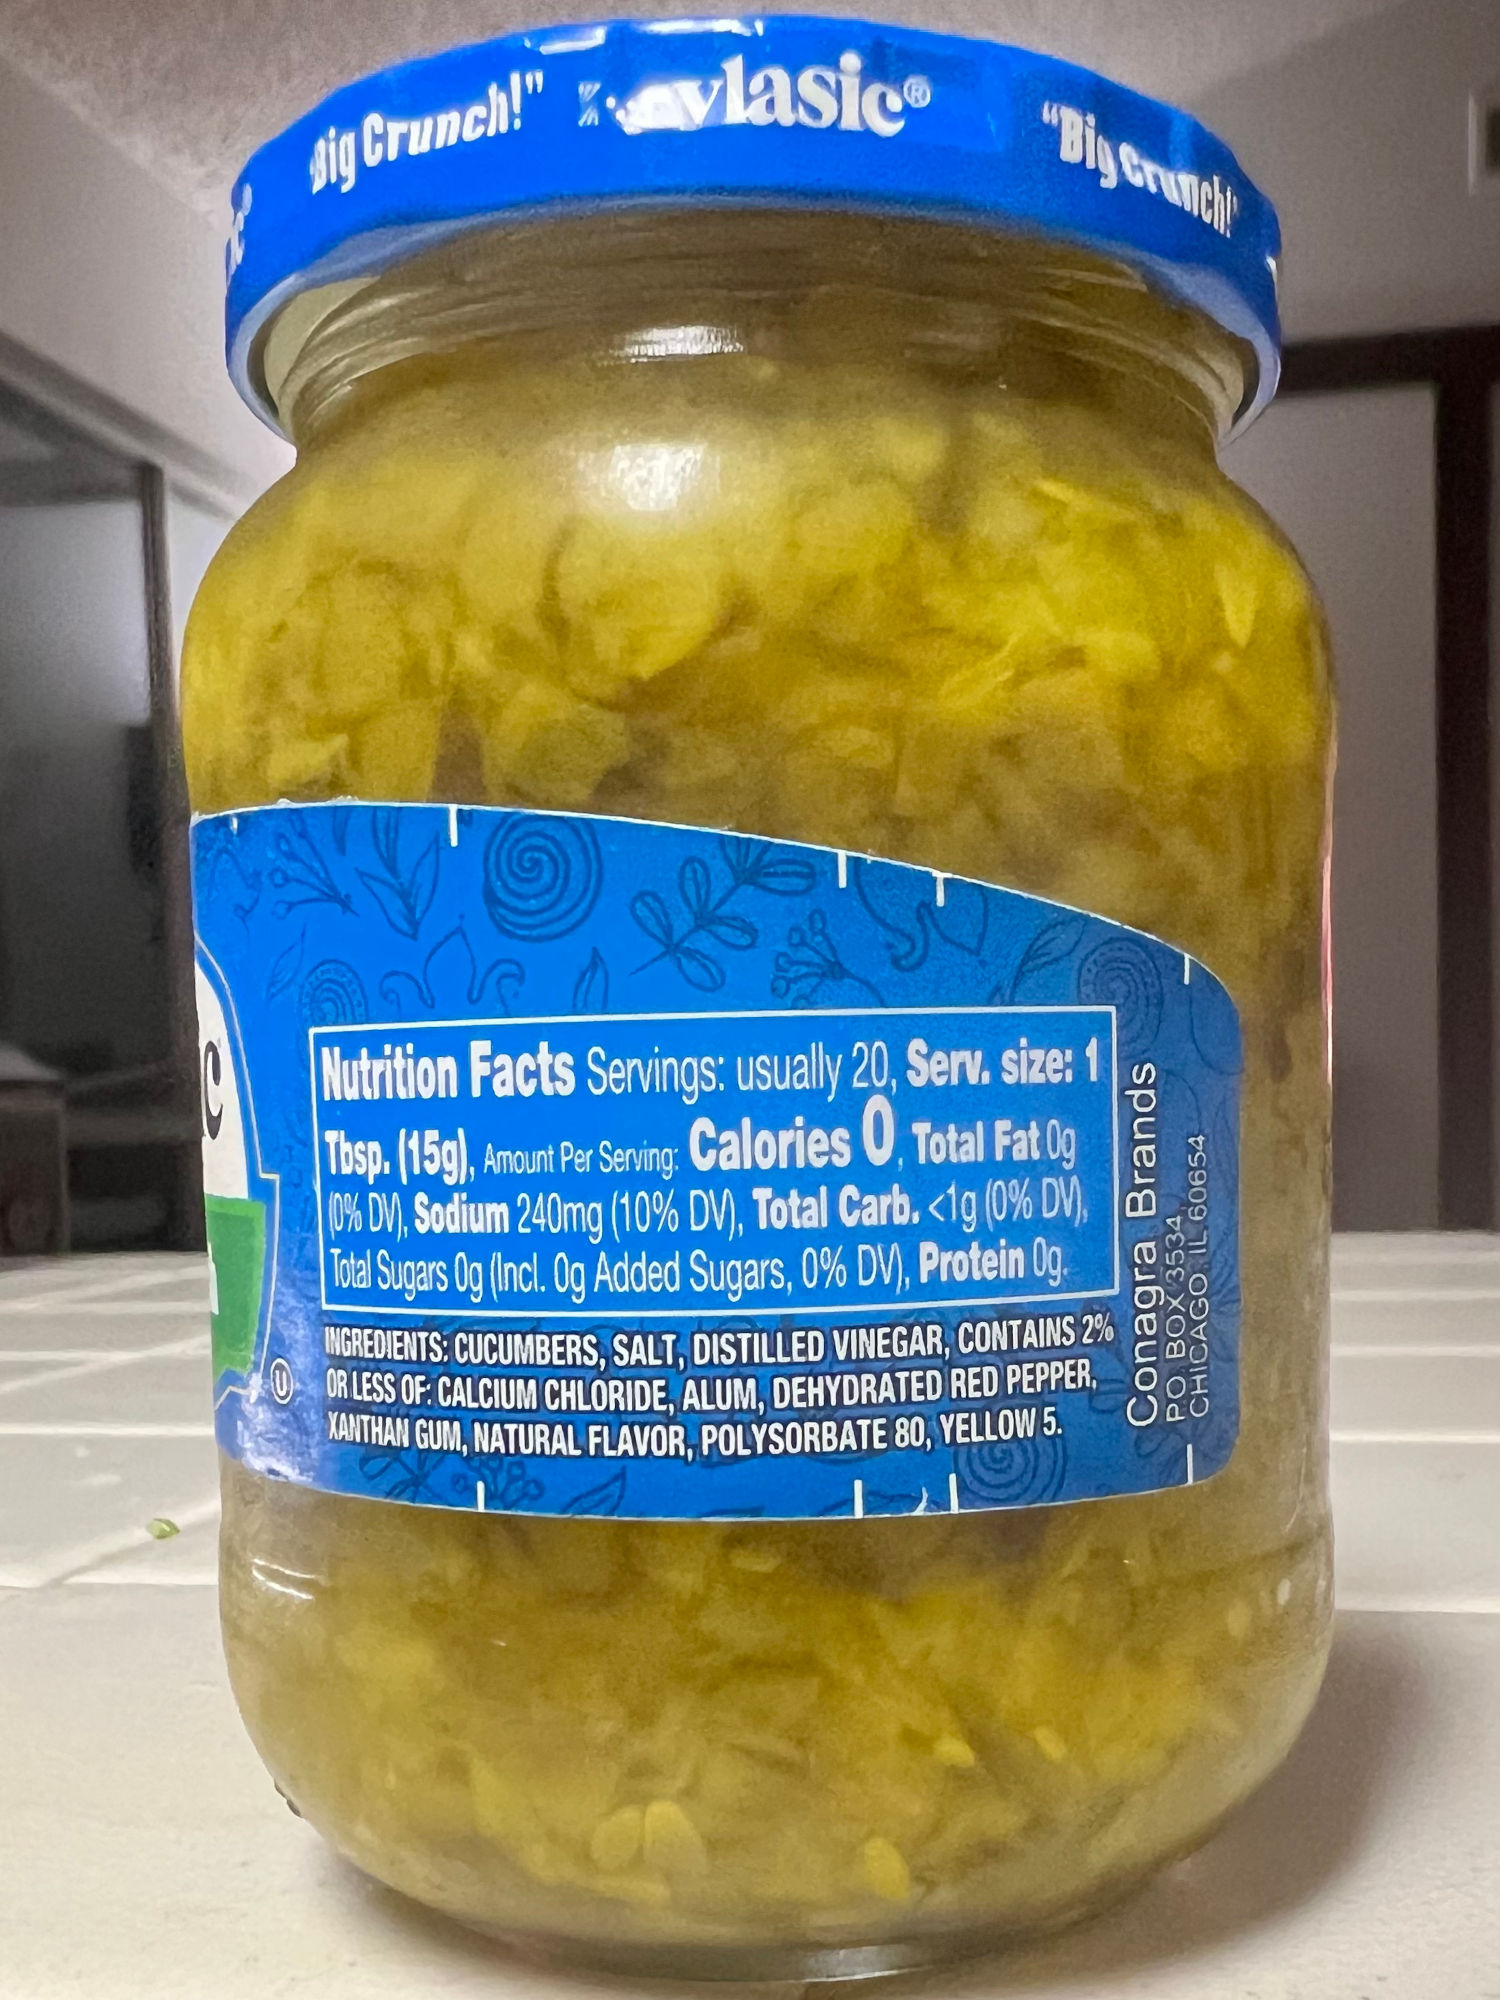 Dill-Pickle-Relish Vlasic Nutrition Facts